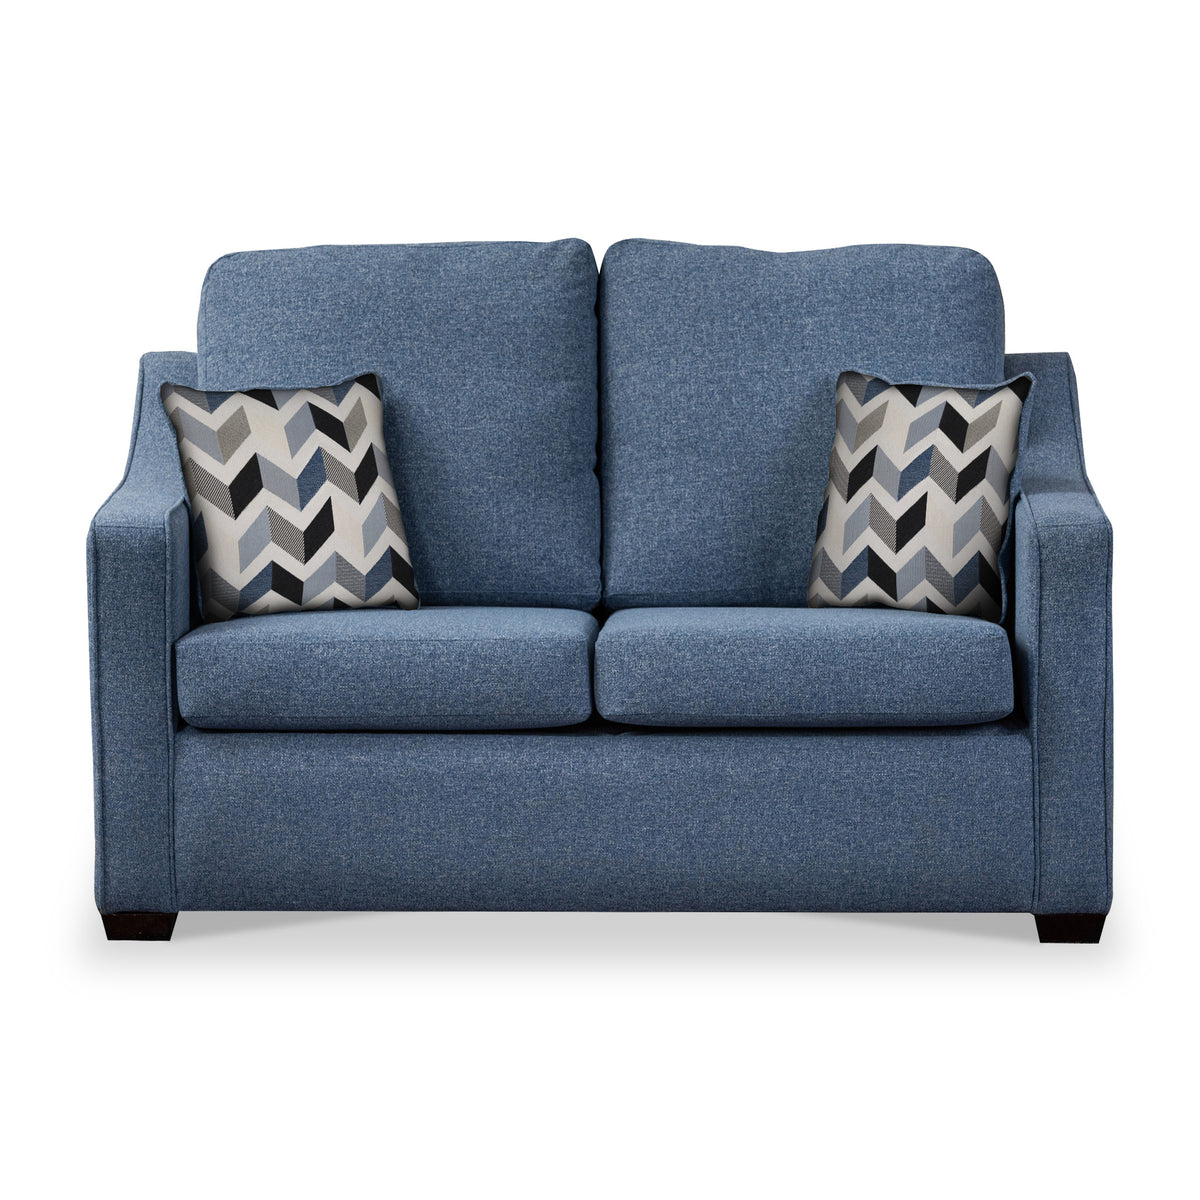 Charlcote Denim Faux Linen 2 Seater Sofabed with Denim Scatter Cushions from Roseland Furniture